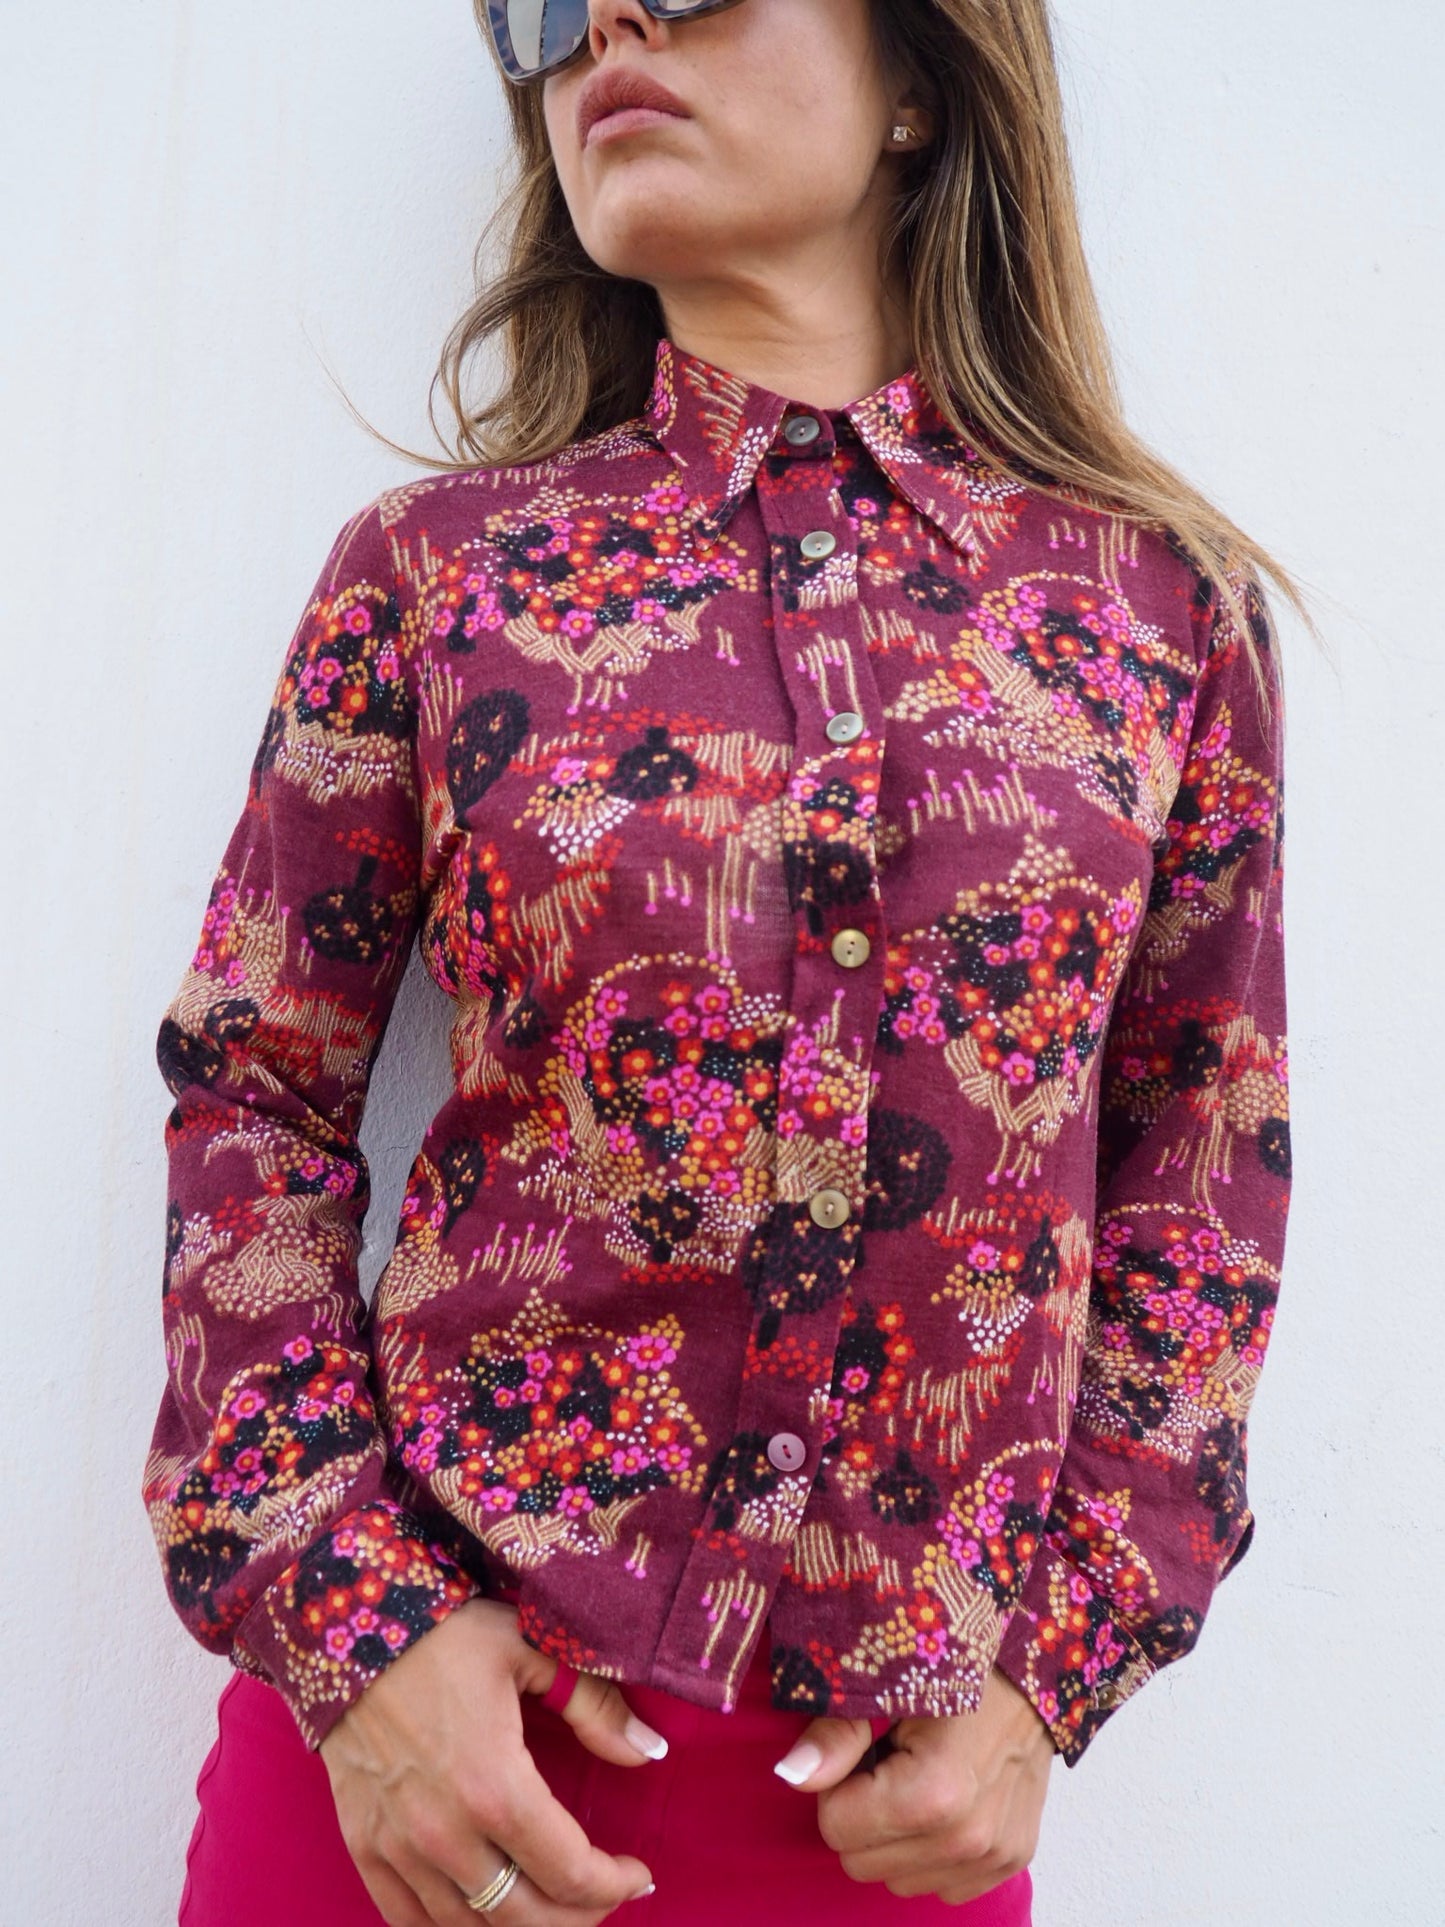 Original vintage 70’s cool printed pink and purple shirt made in man made fibres with a soft touch with oversize collars